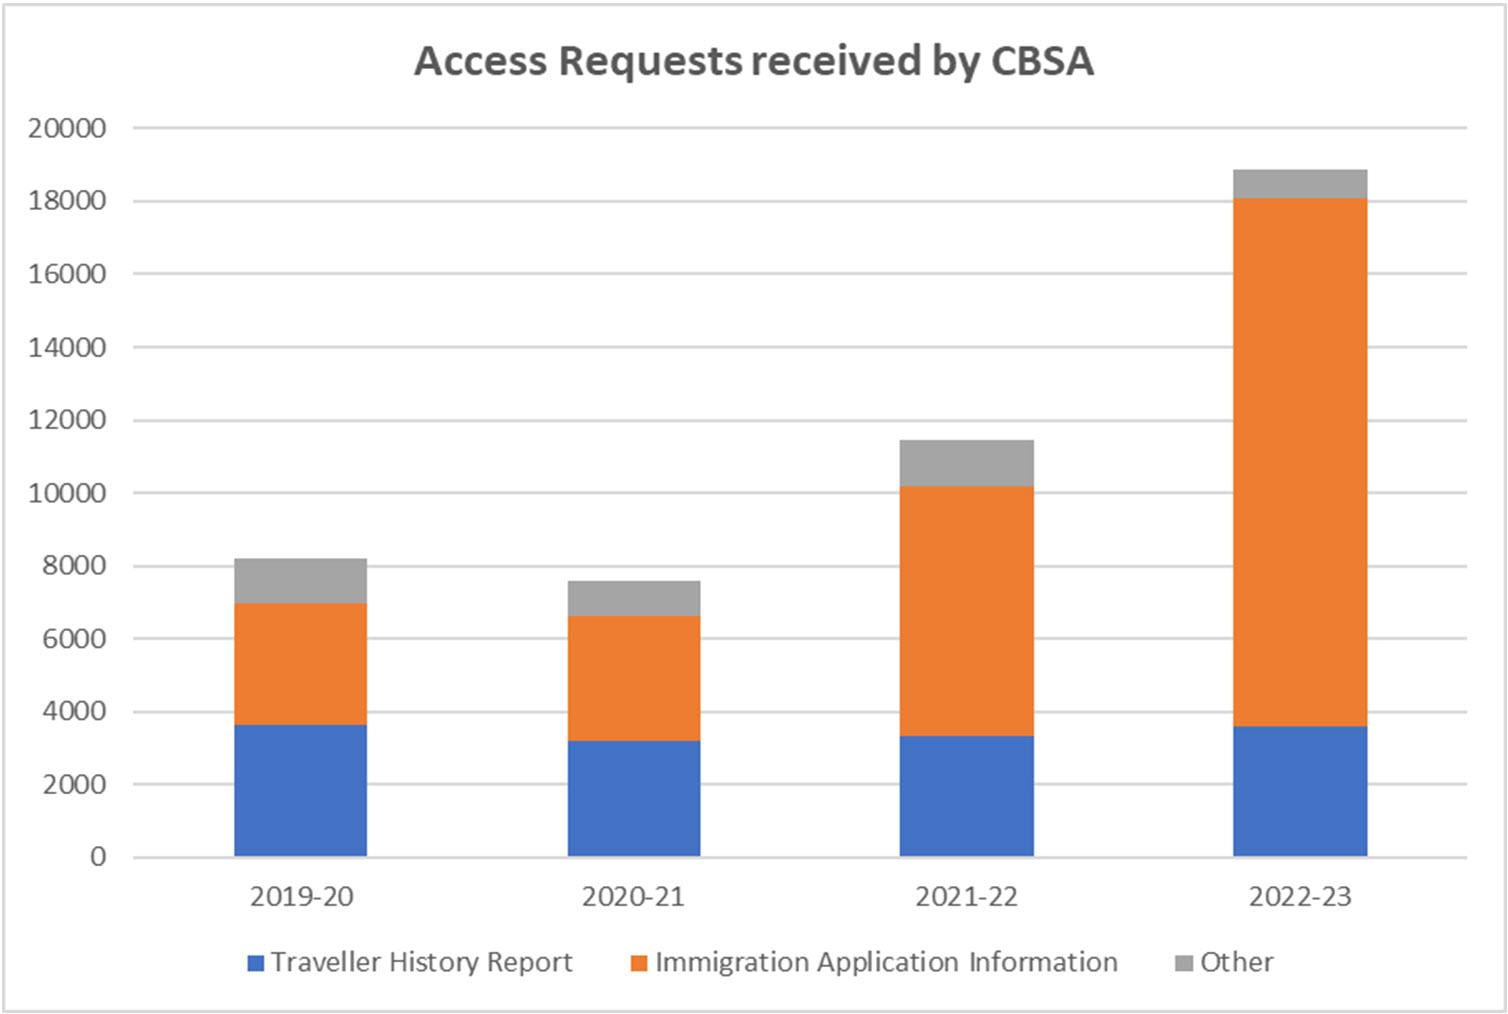 Access Requests Received by CBSA